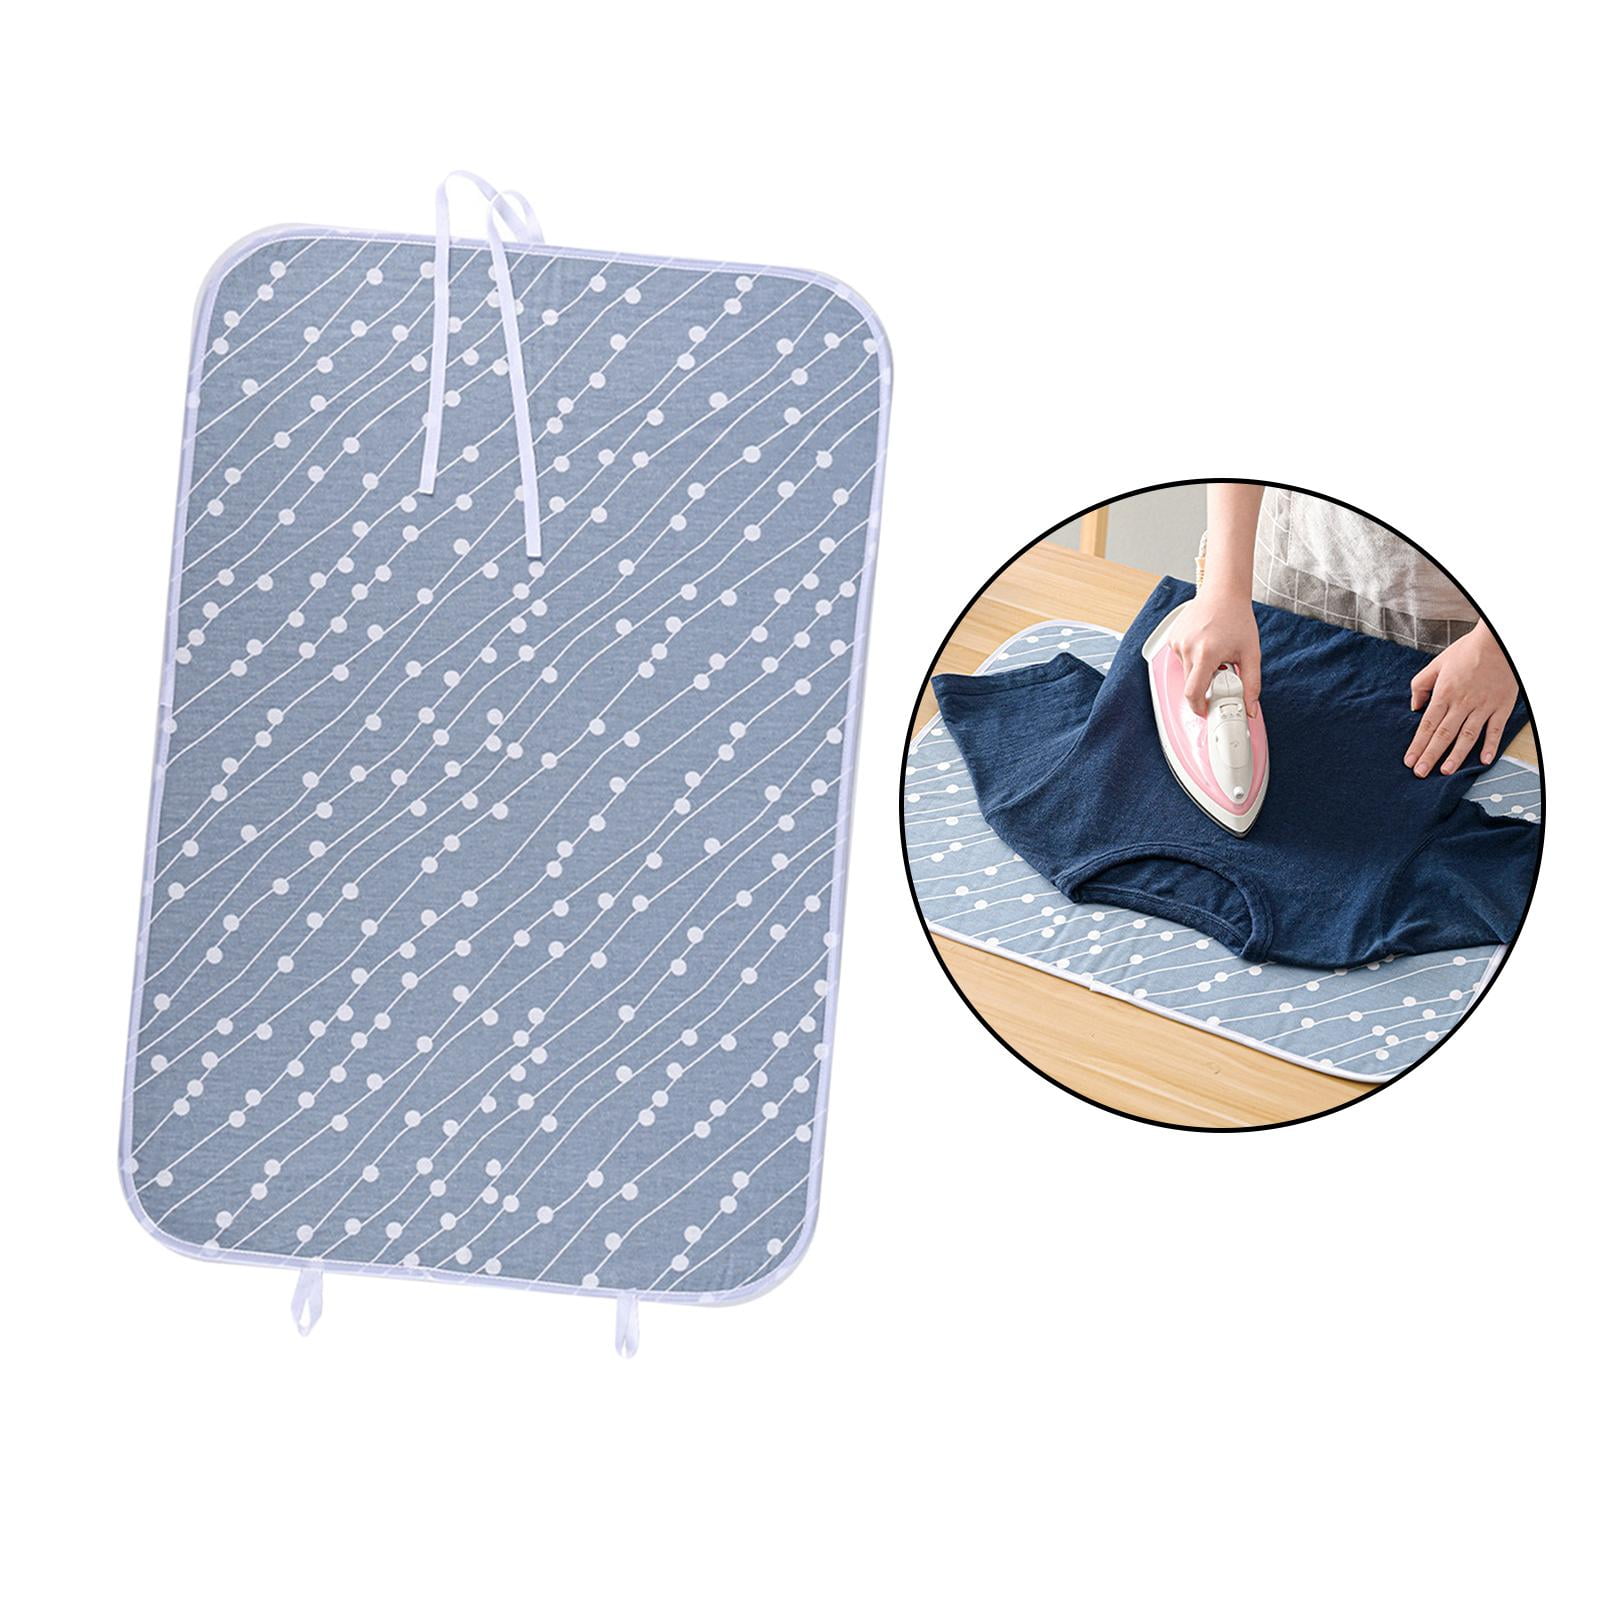  Yosoo Portable Ironing Blanket Ironing Mat Heat Resistant Pad  Cover for Washer Dryer Table Top Countertop Ironing Board for Small Space :  Home & Kitchen